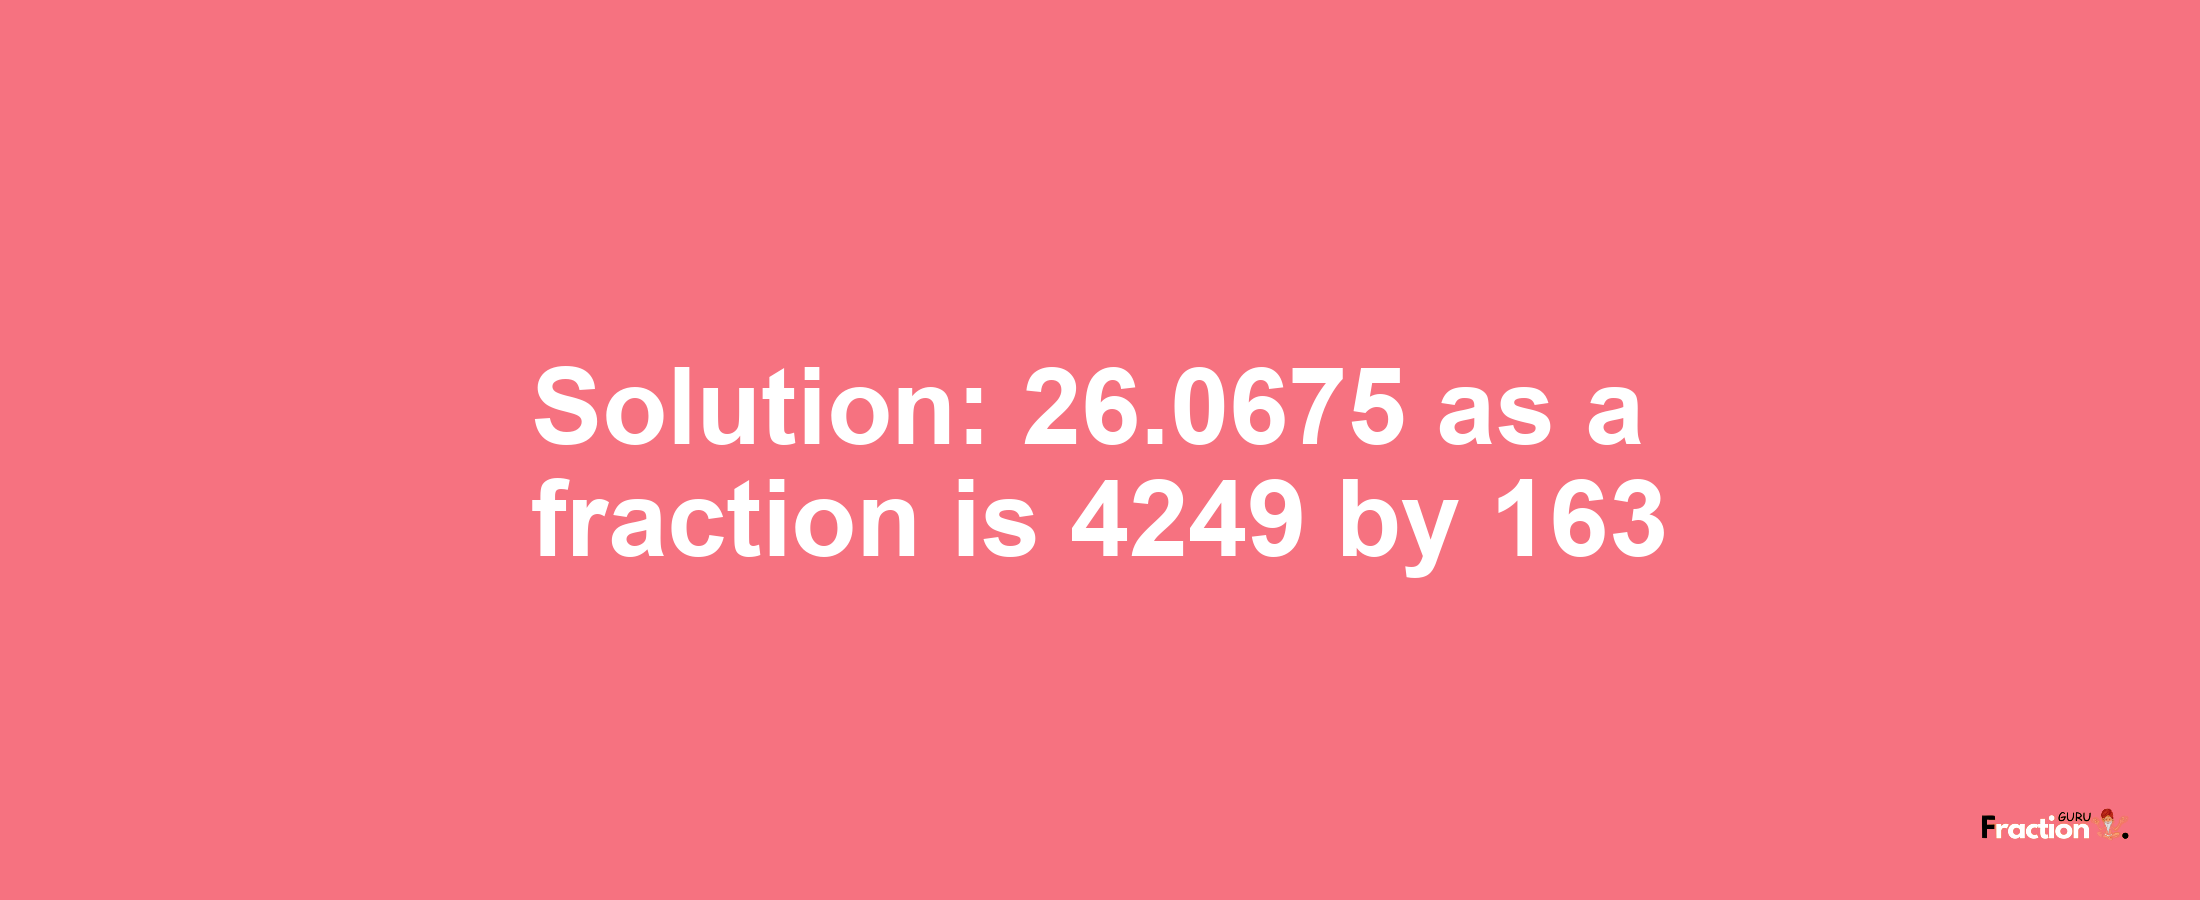 Solution:26.0675 as a fraction is 4249/163